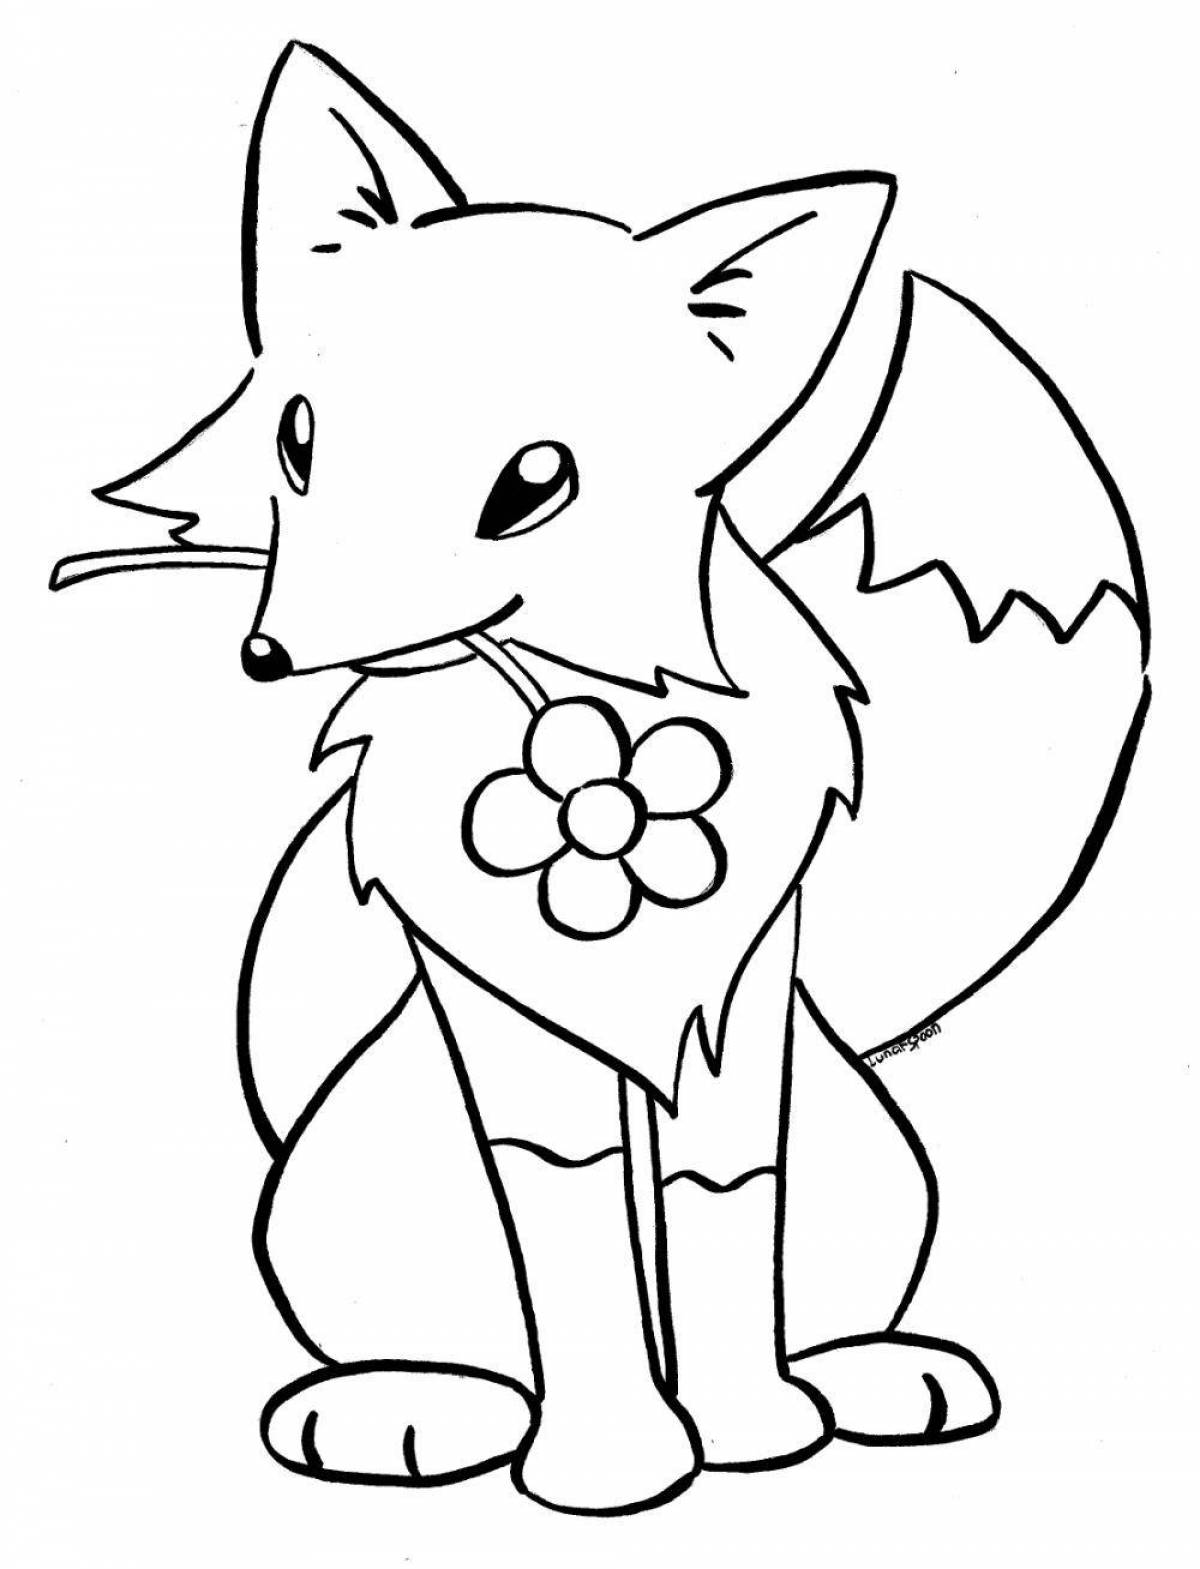 Naughty fox coloring picture for kids